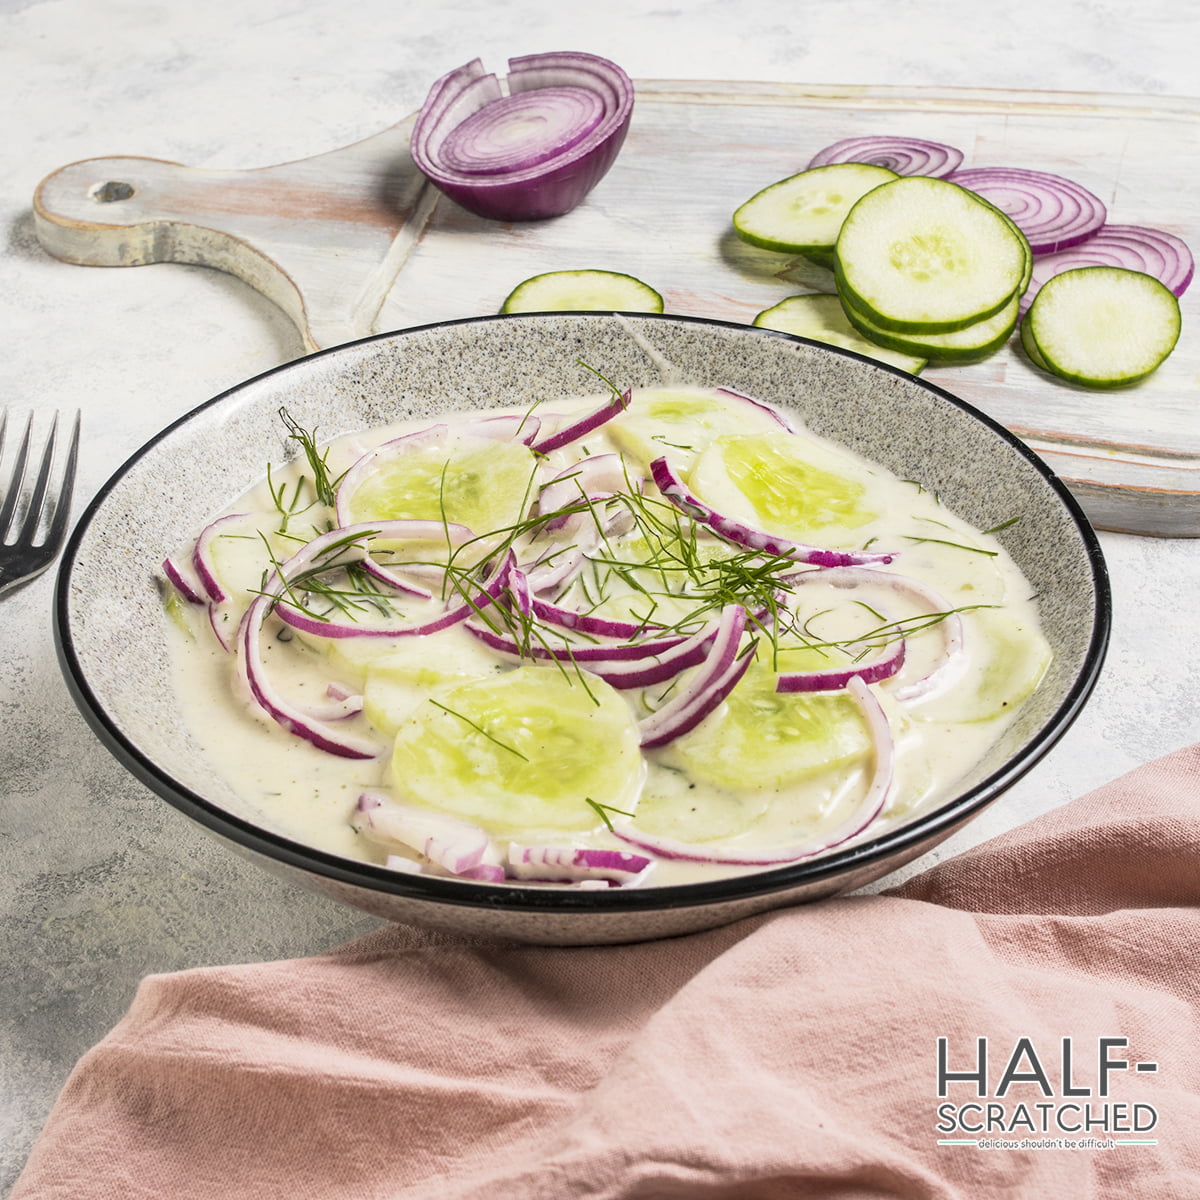 Cucumber Salad With Mayo on a White Table